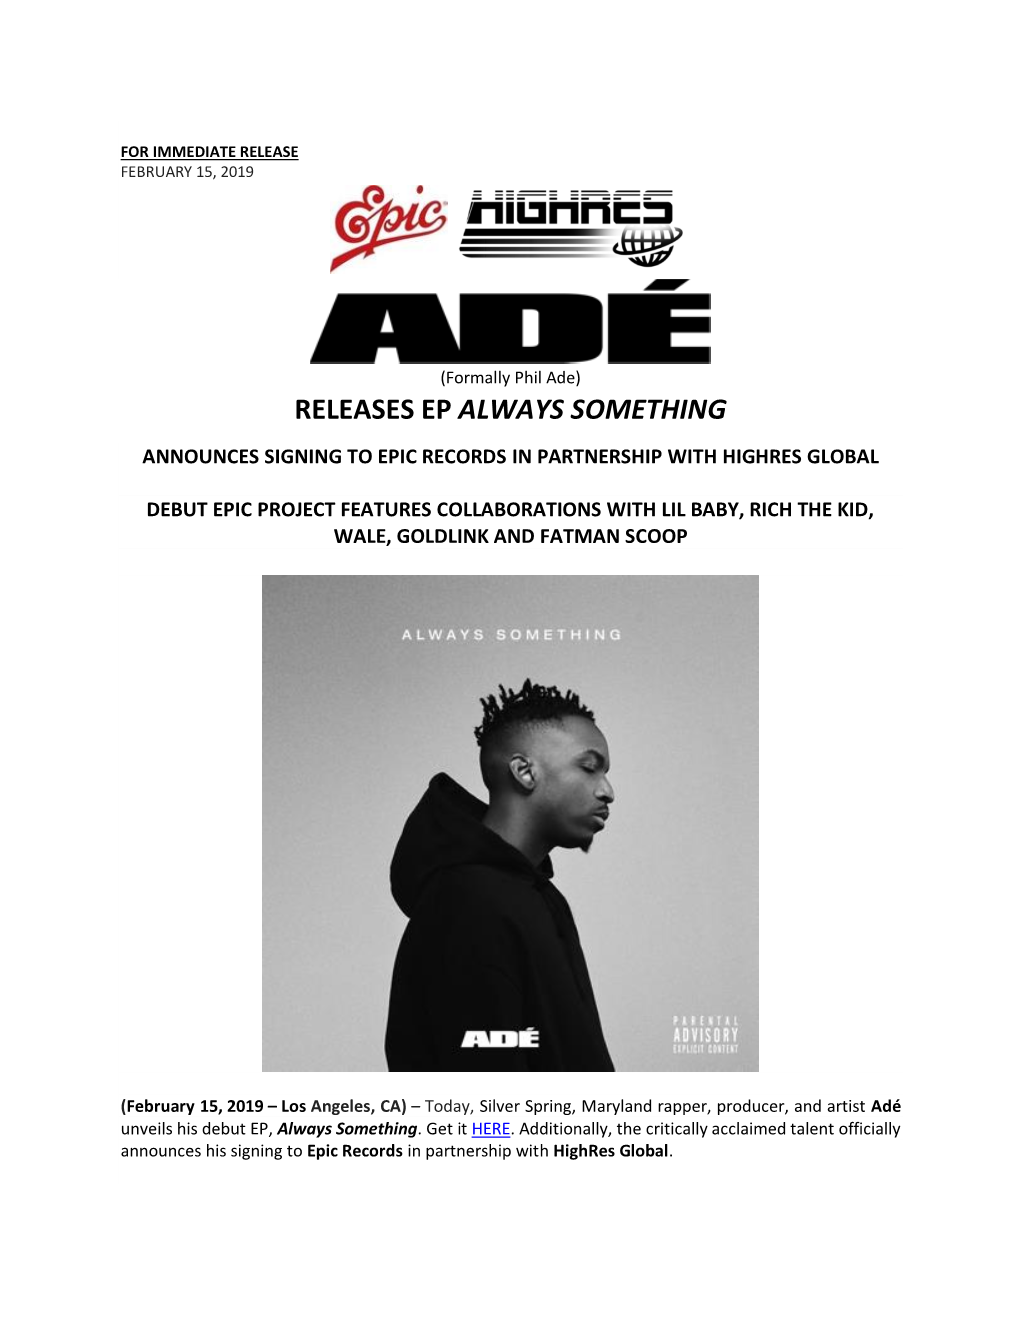 Releases Ep Always Something Announces Signing to Epic Records in Partnership with Highres Global